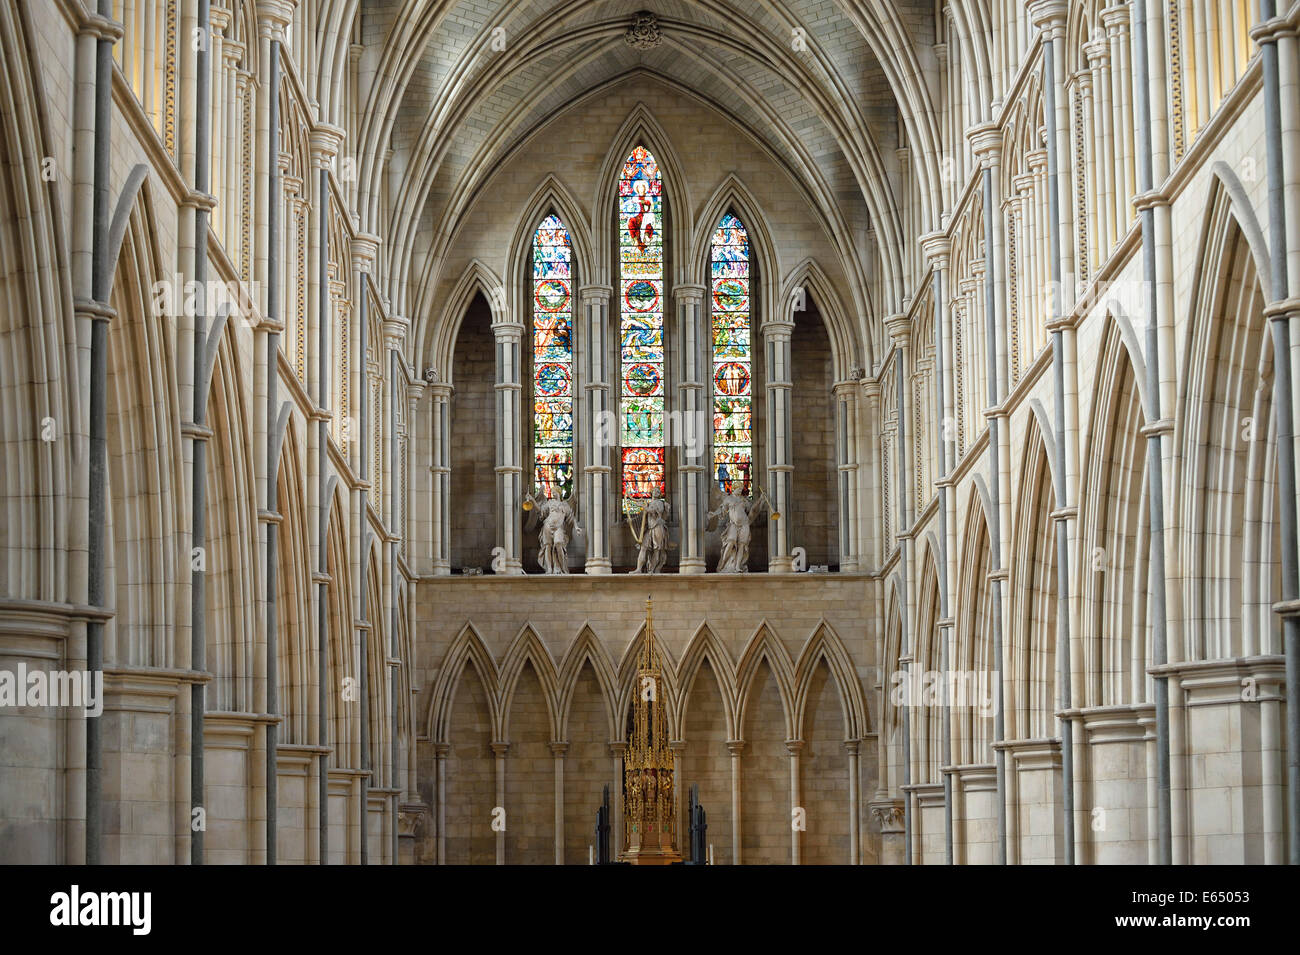 Nave, chancel, Southwark Cathedral, interior view, London, England, United Kingdom Stock Photo